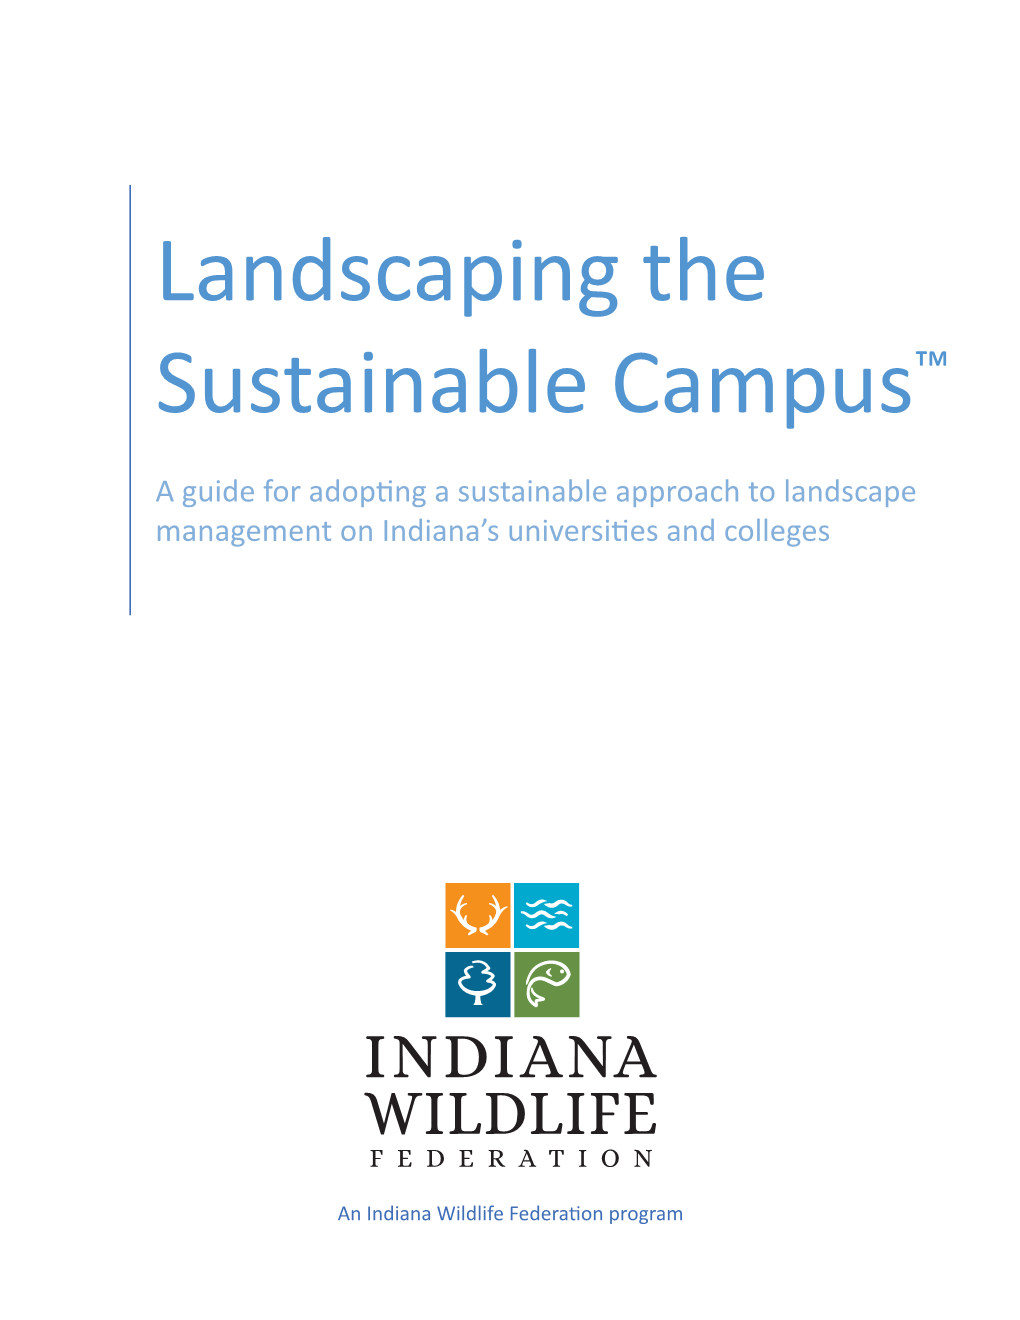 Landscaping the Sustainable Campus™